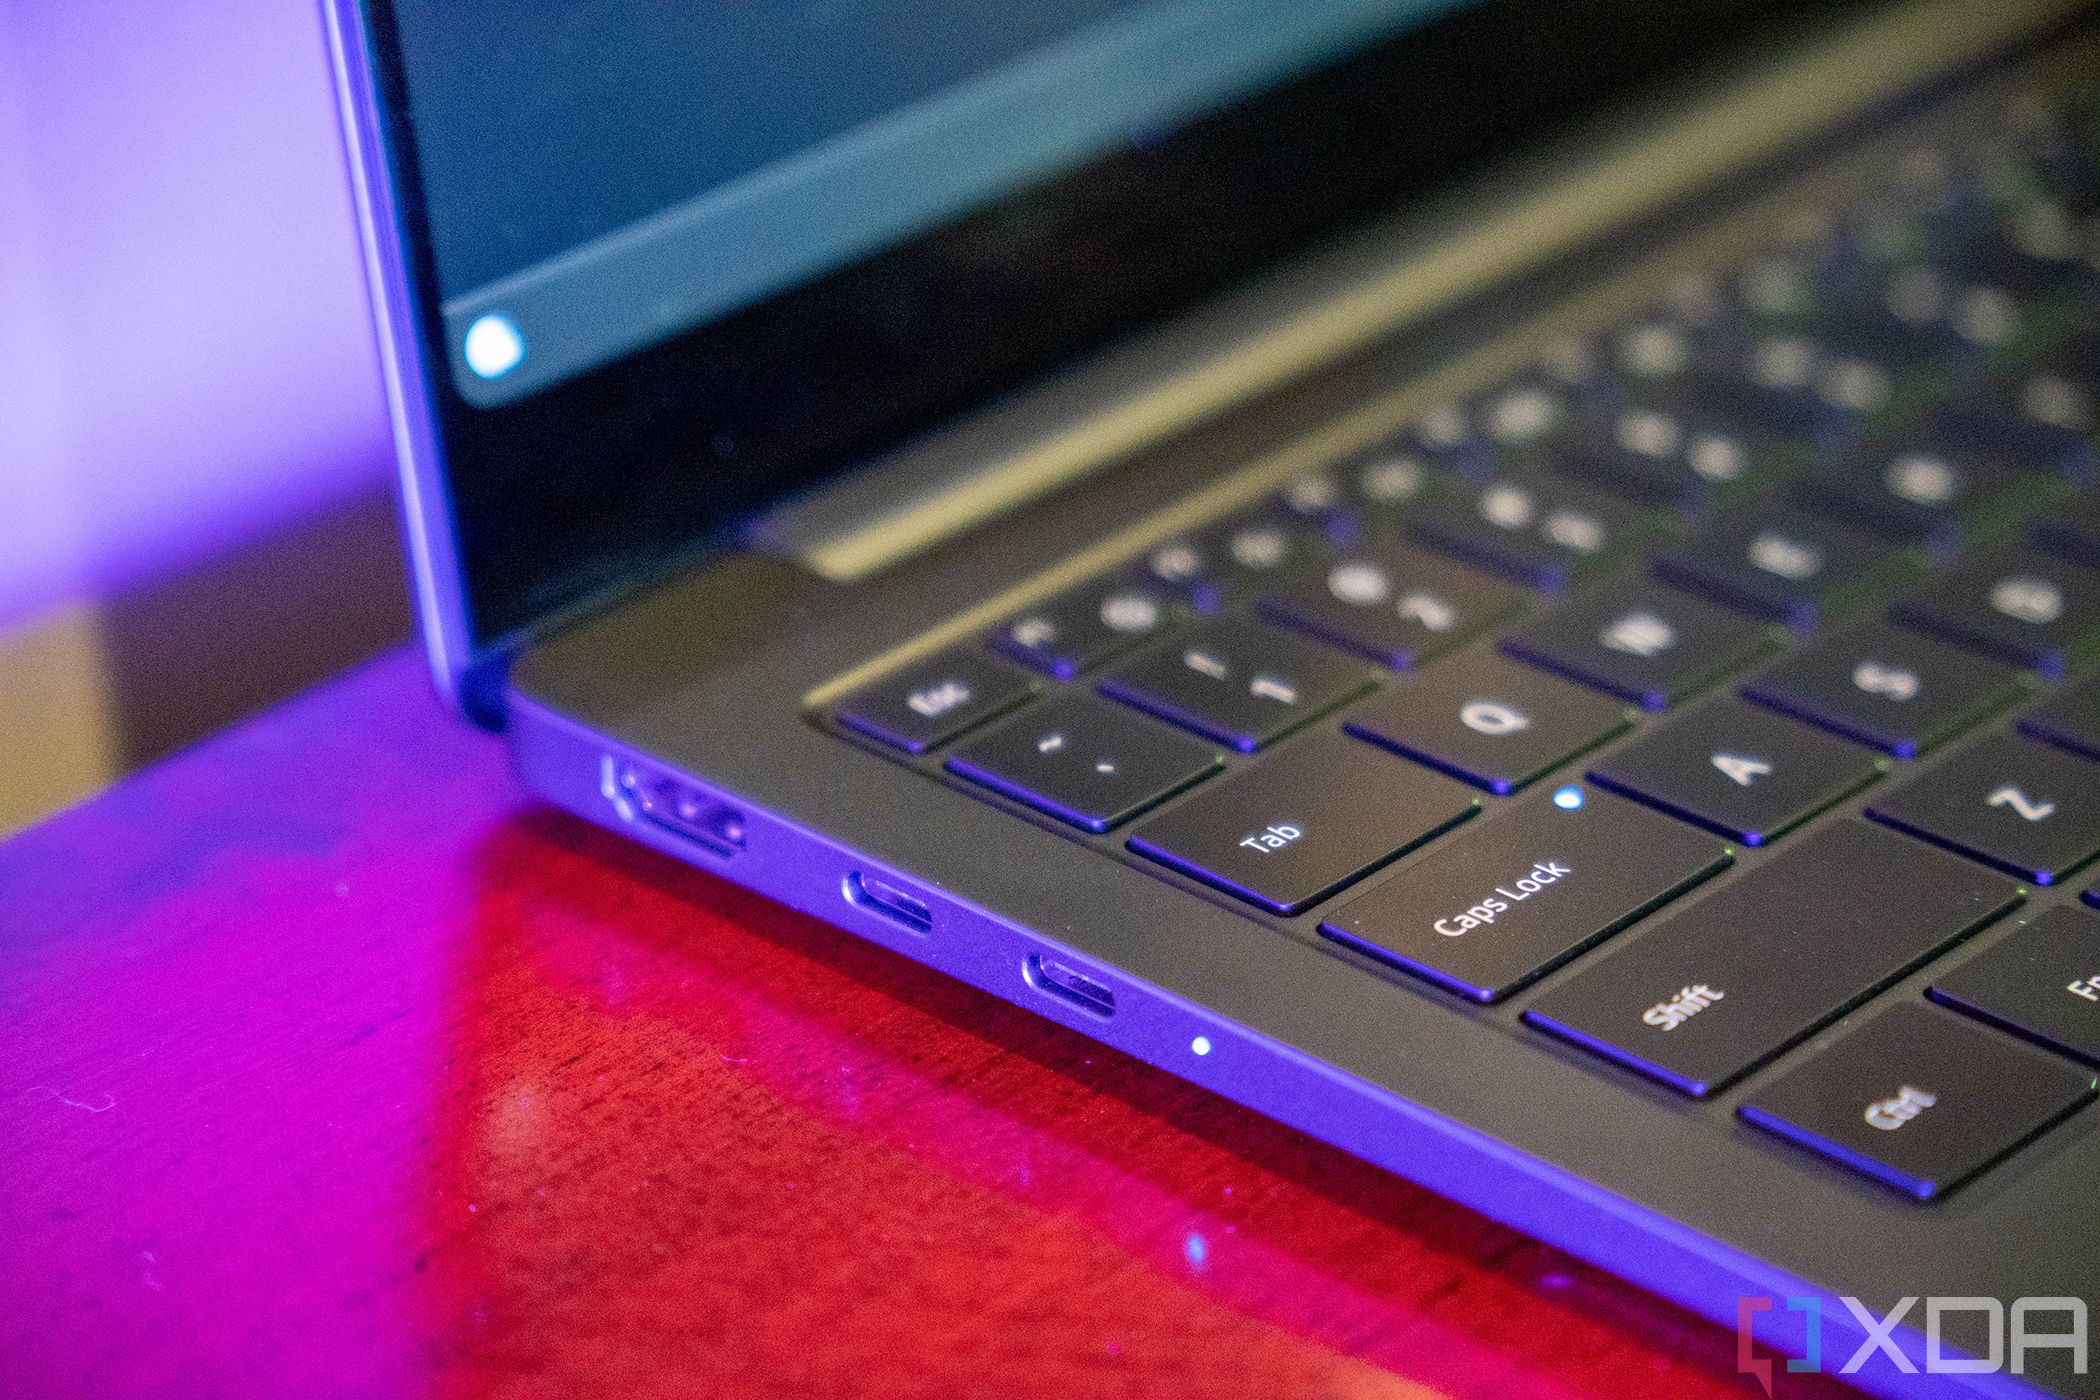 Angled view of laptop with two USB Type-C and one HDMI port